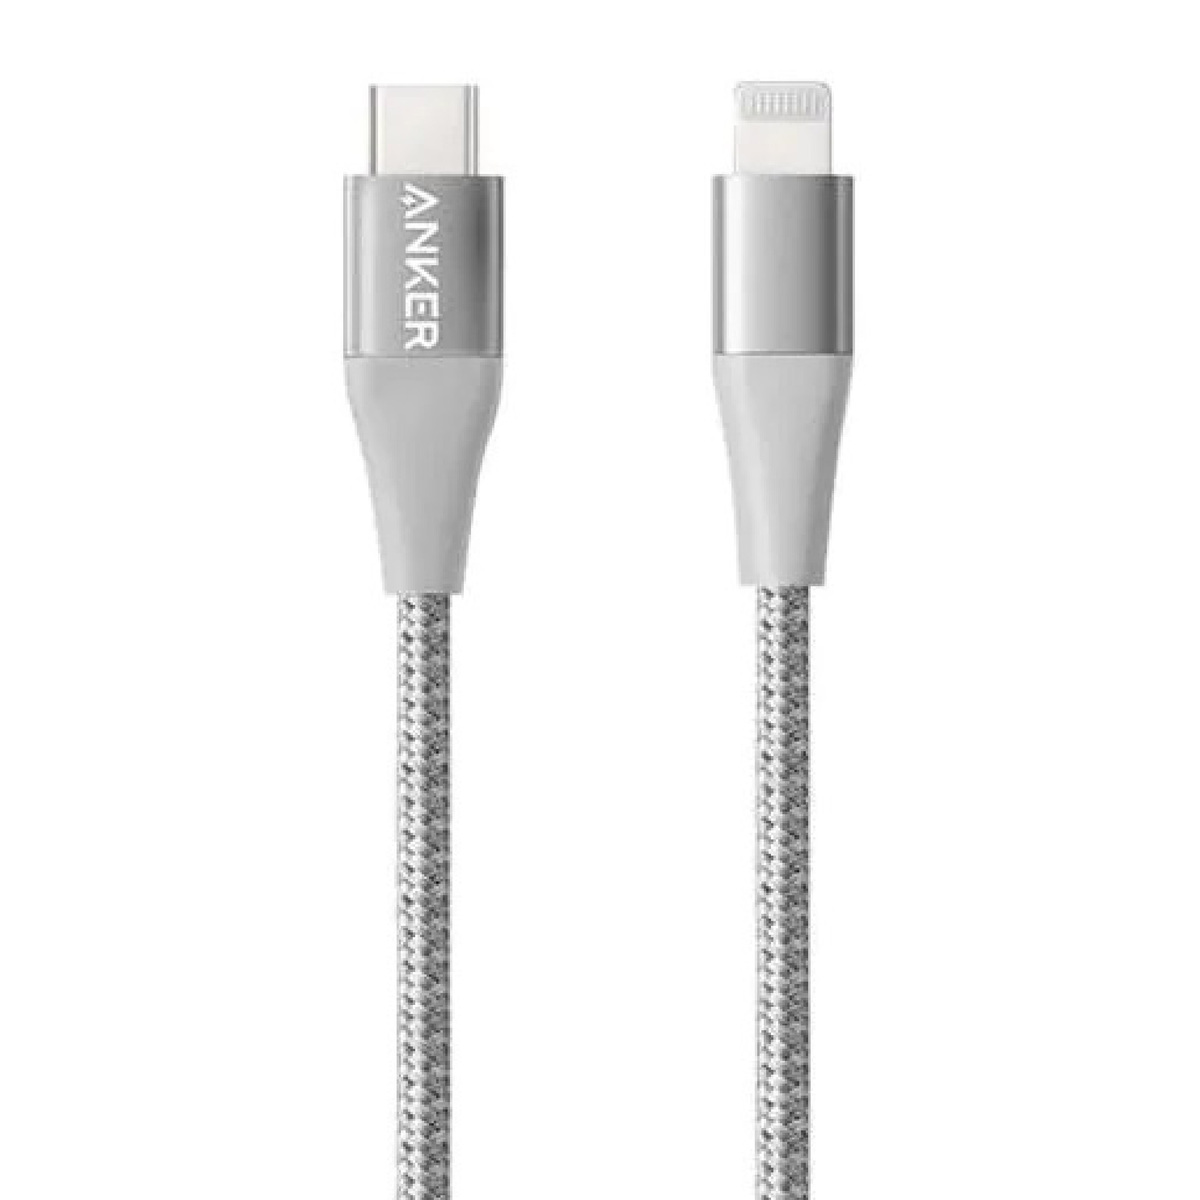 Anker TypeC to Lightning Cable .A8652H41 3Ft